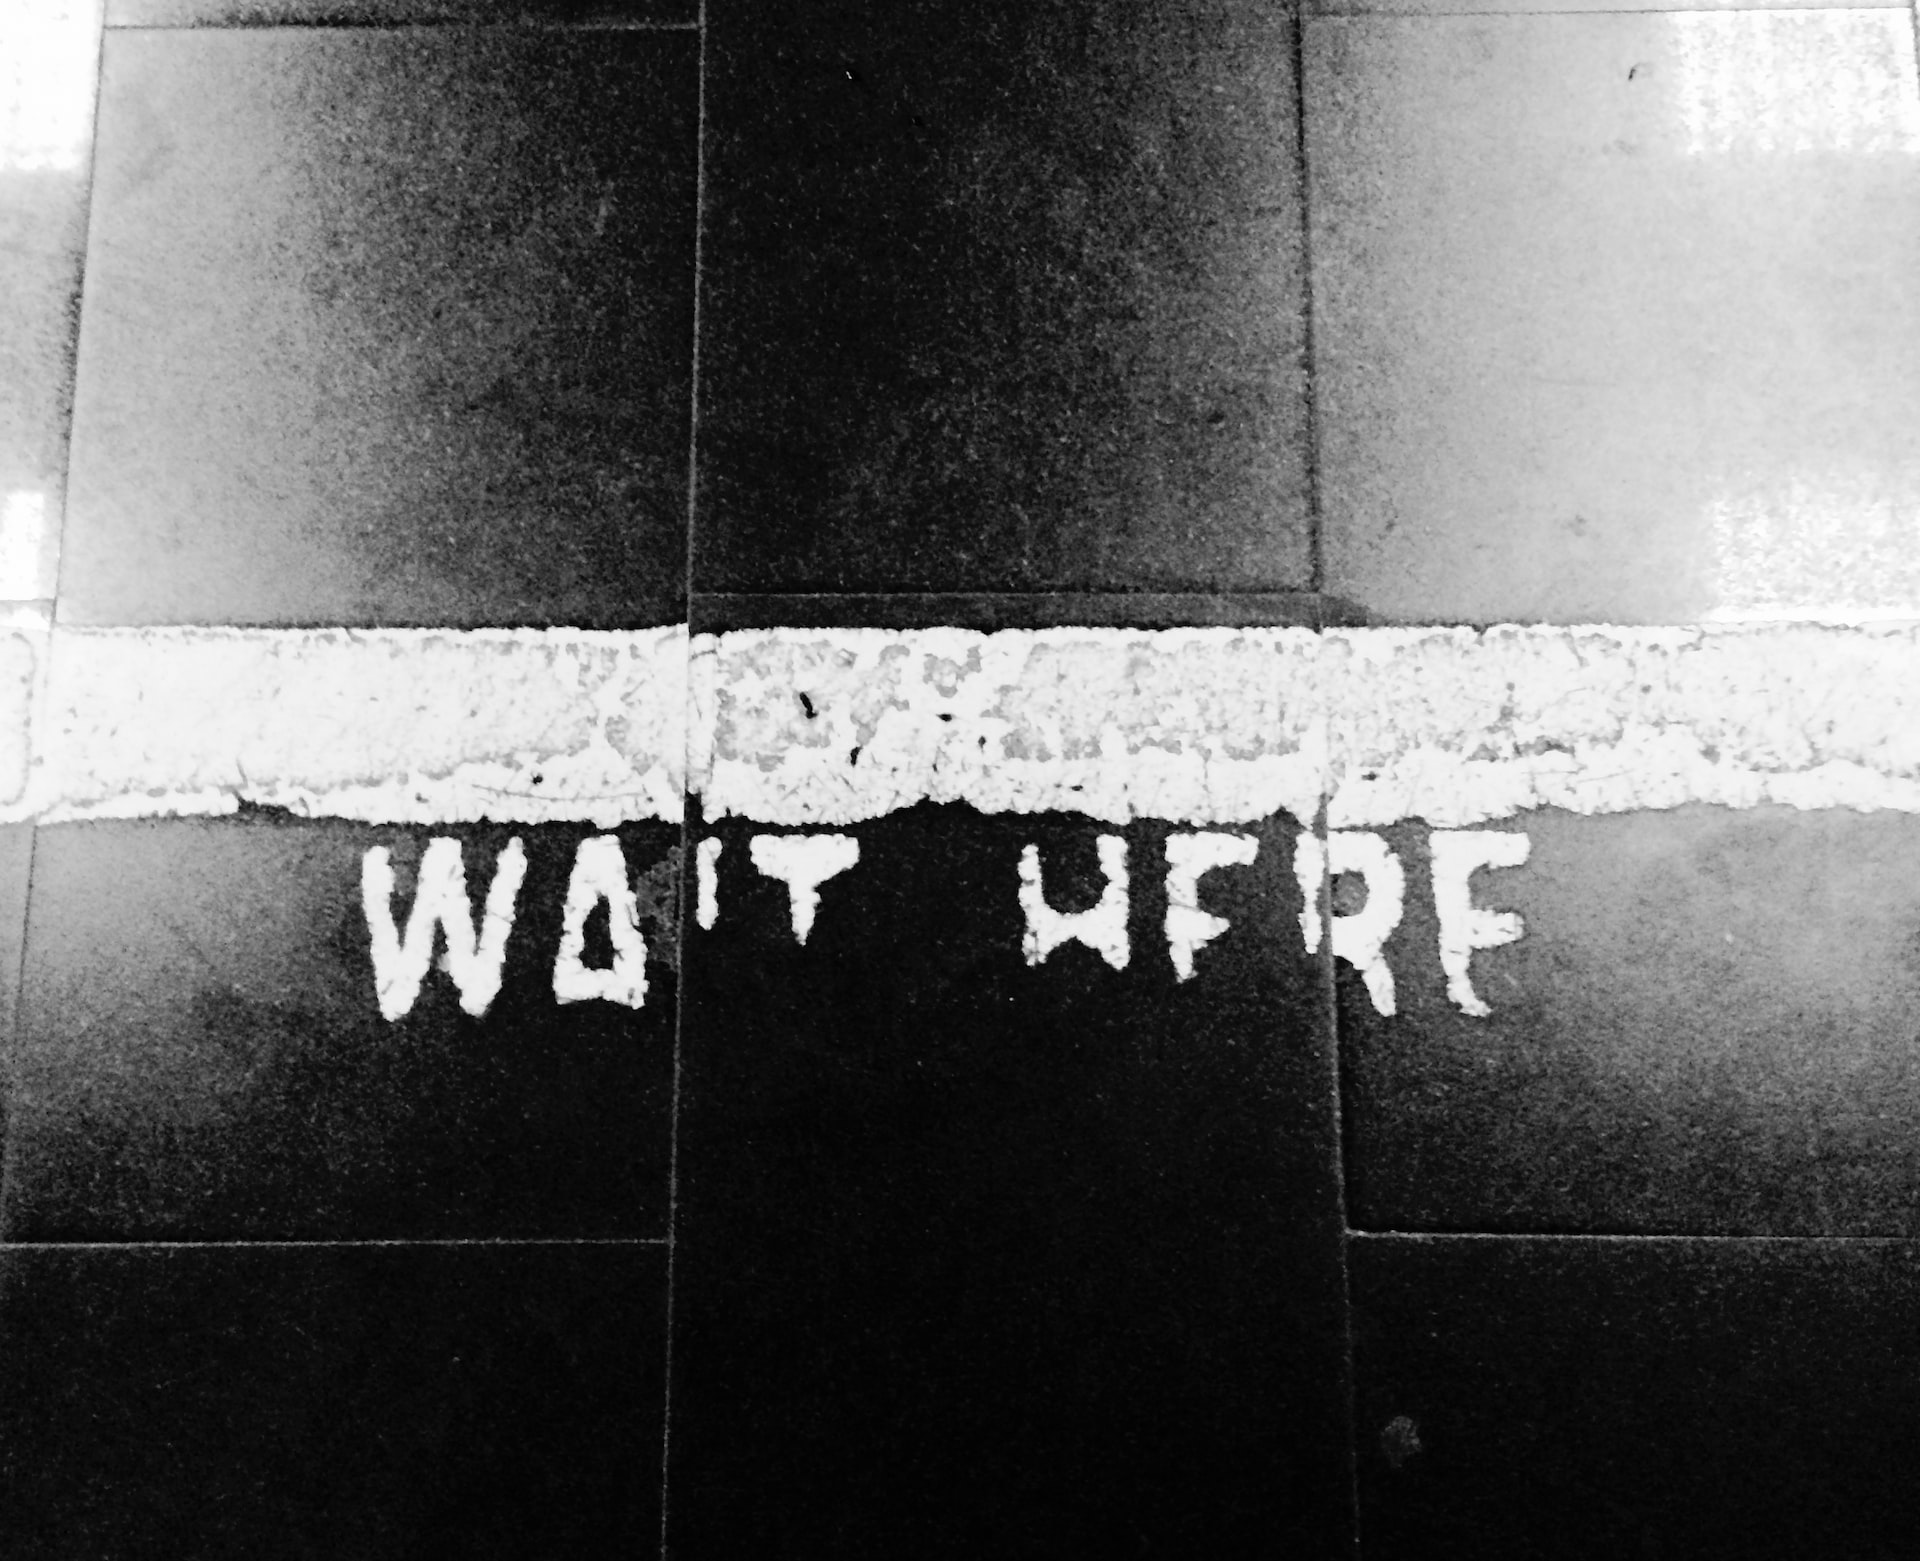 Wait here painted on the floor